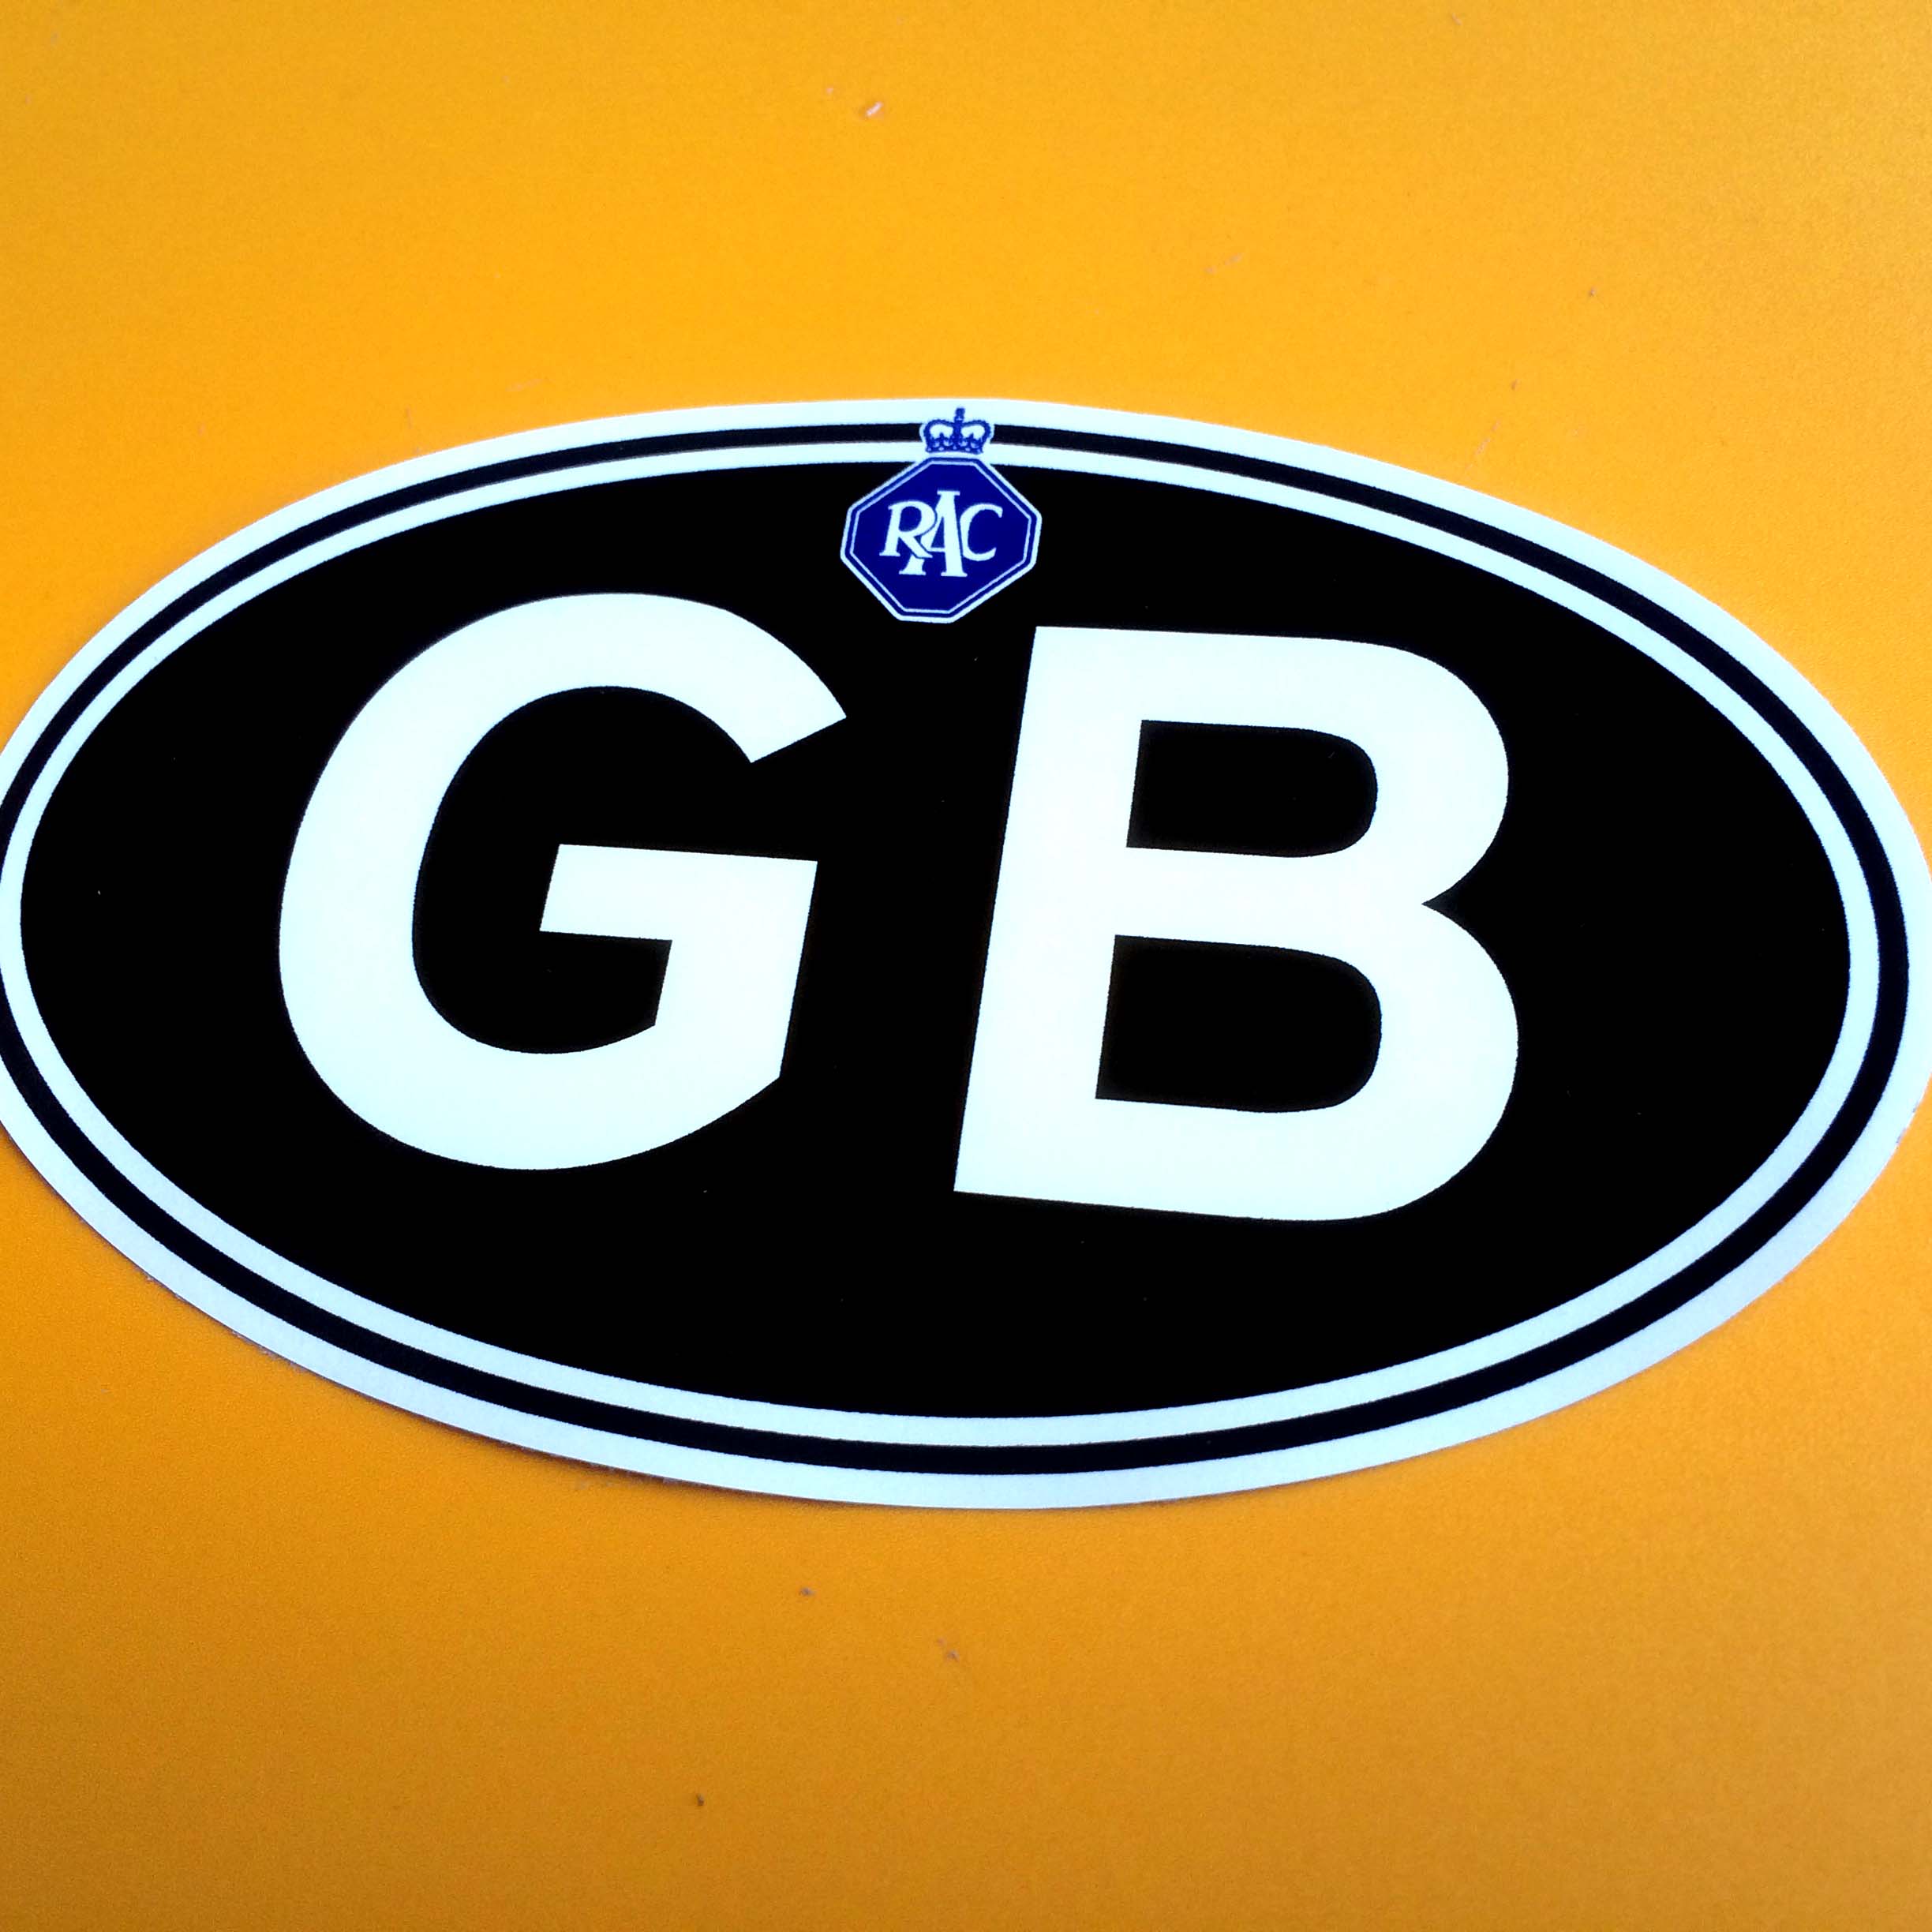 GB in bold white lettering on a black oval sticker with a white border. Above GB is the RAC logo - white lettering on a blue octagon topped with a crown.